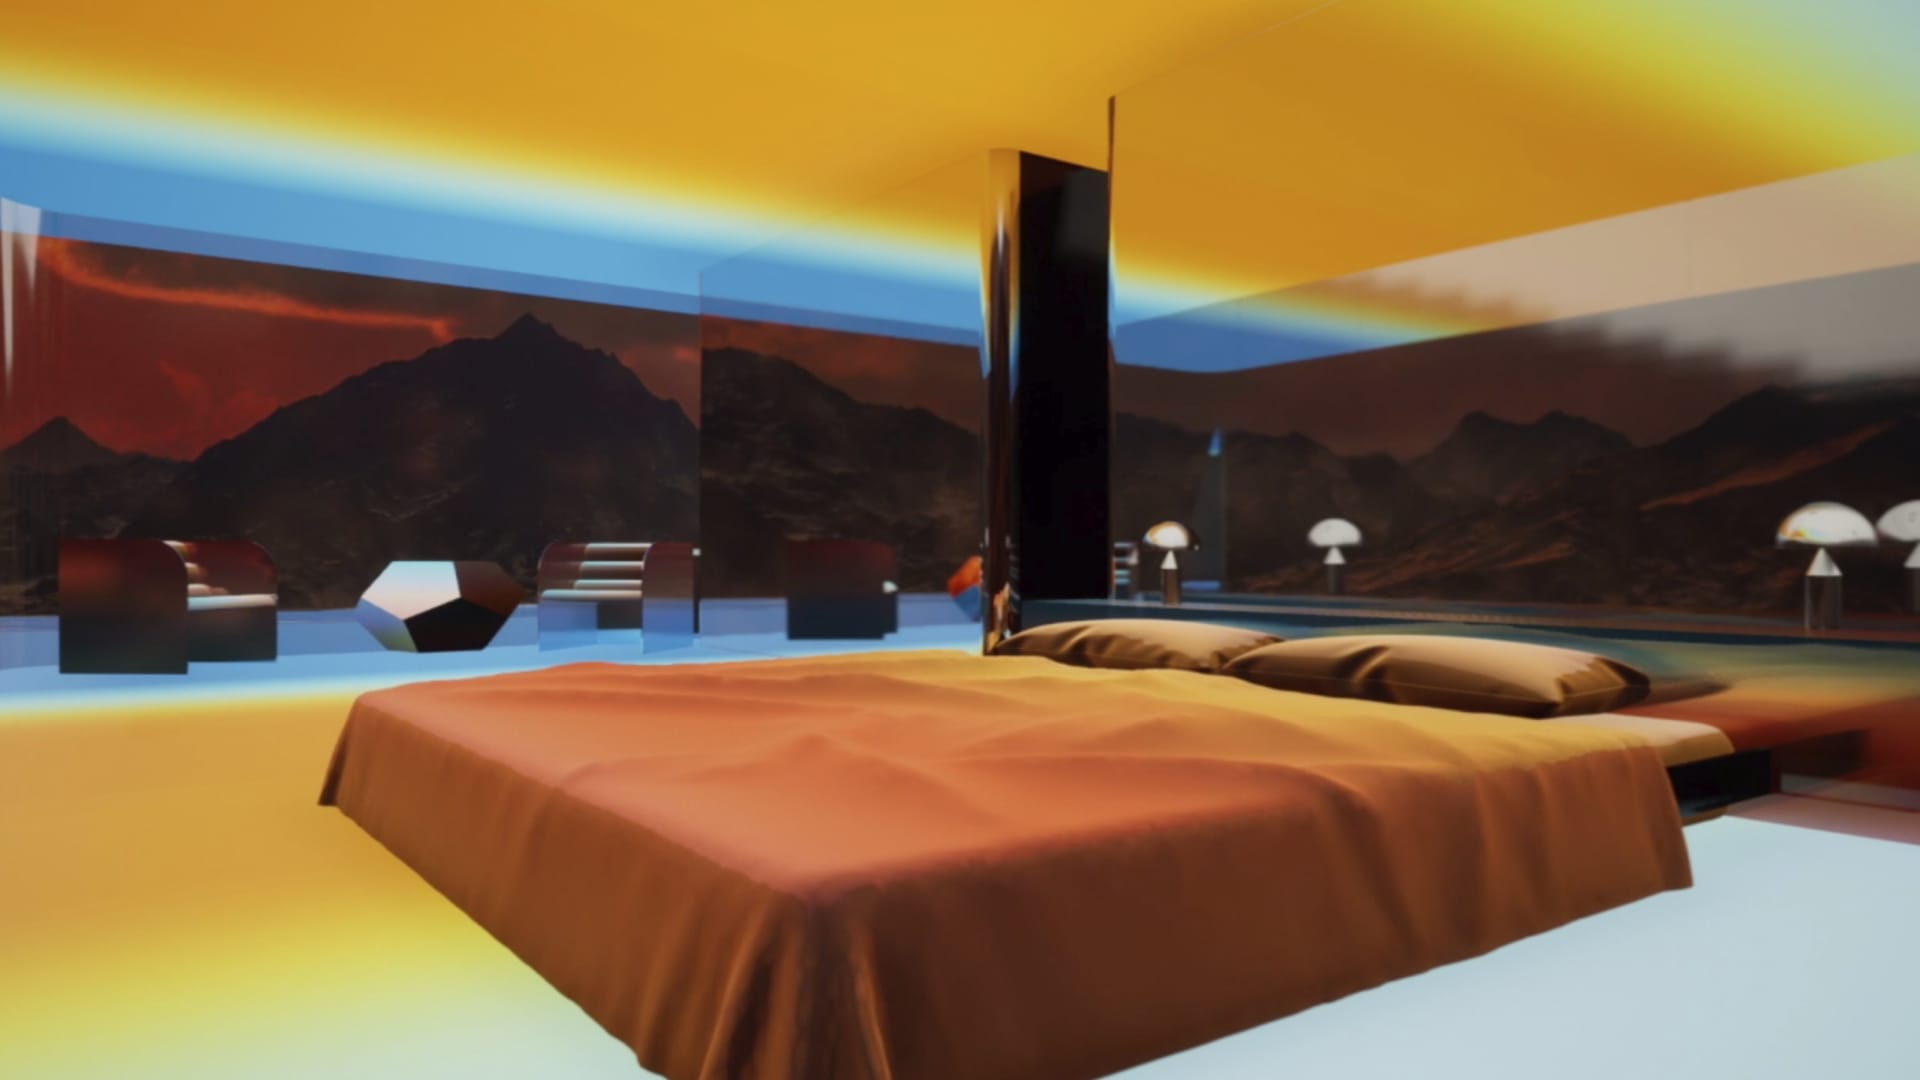 A view of Mars House, a 3D NFT creation from Krista Kim Studios that was recently sold.